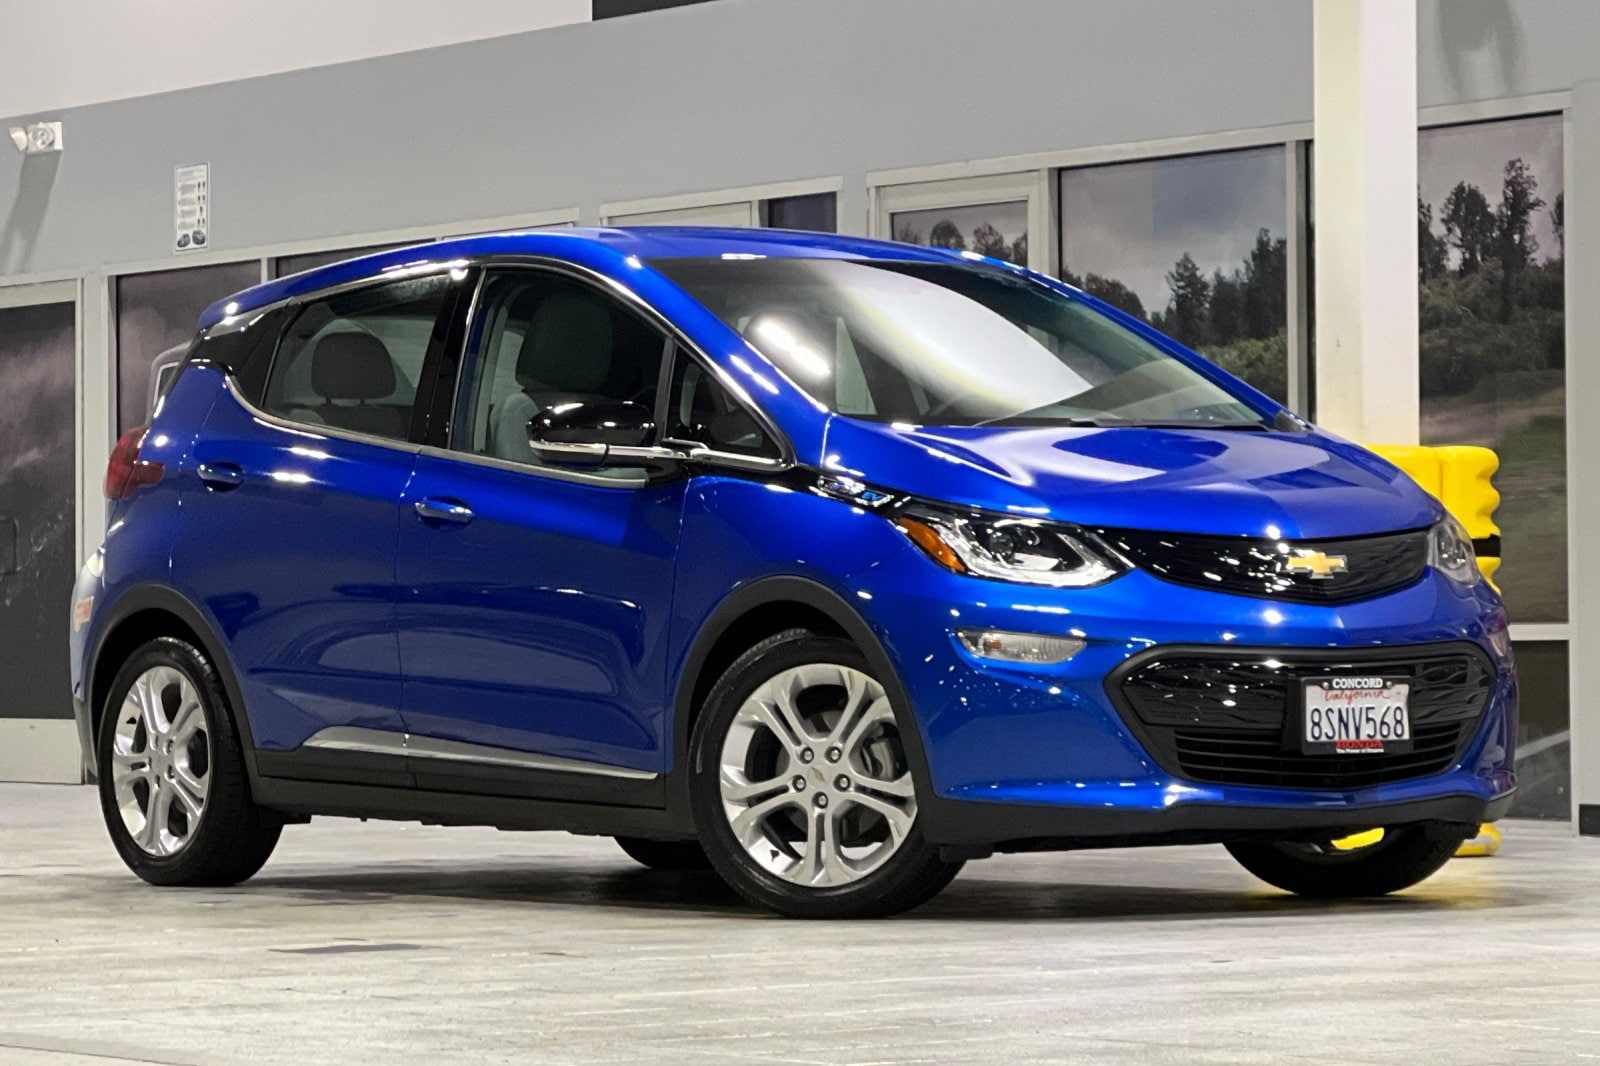 Used 2020 Chevrolet Bolt EV LT with VIN 1G1FY6S06L4132298 for sale in Concord, CA